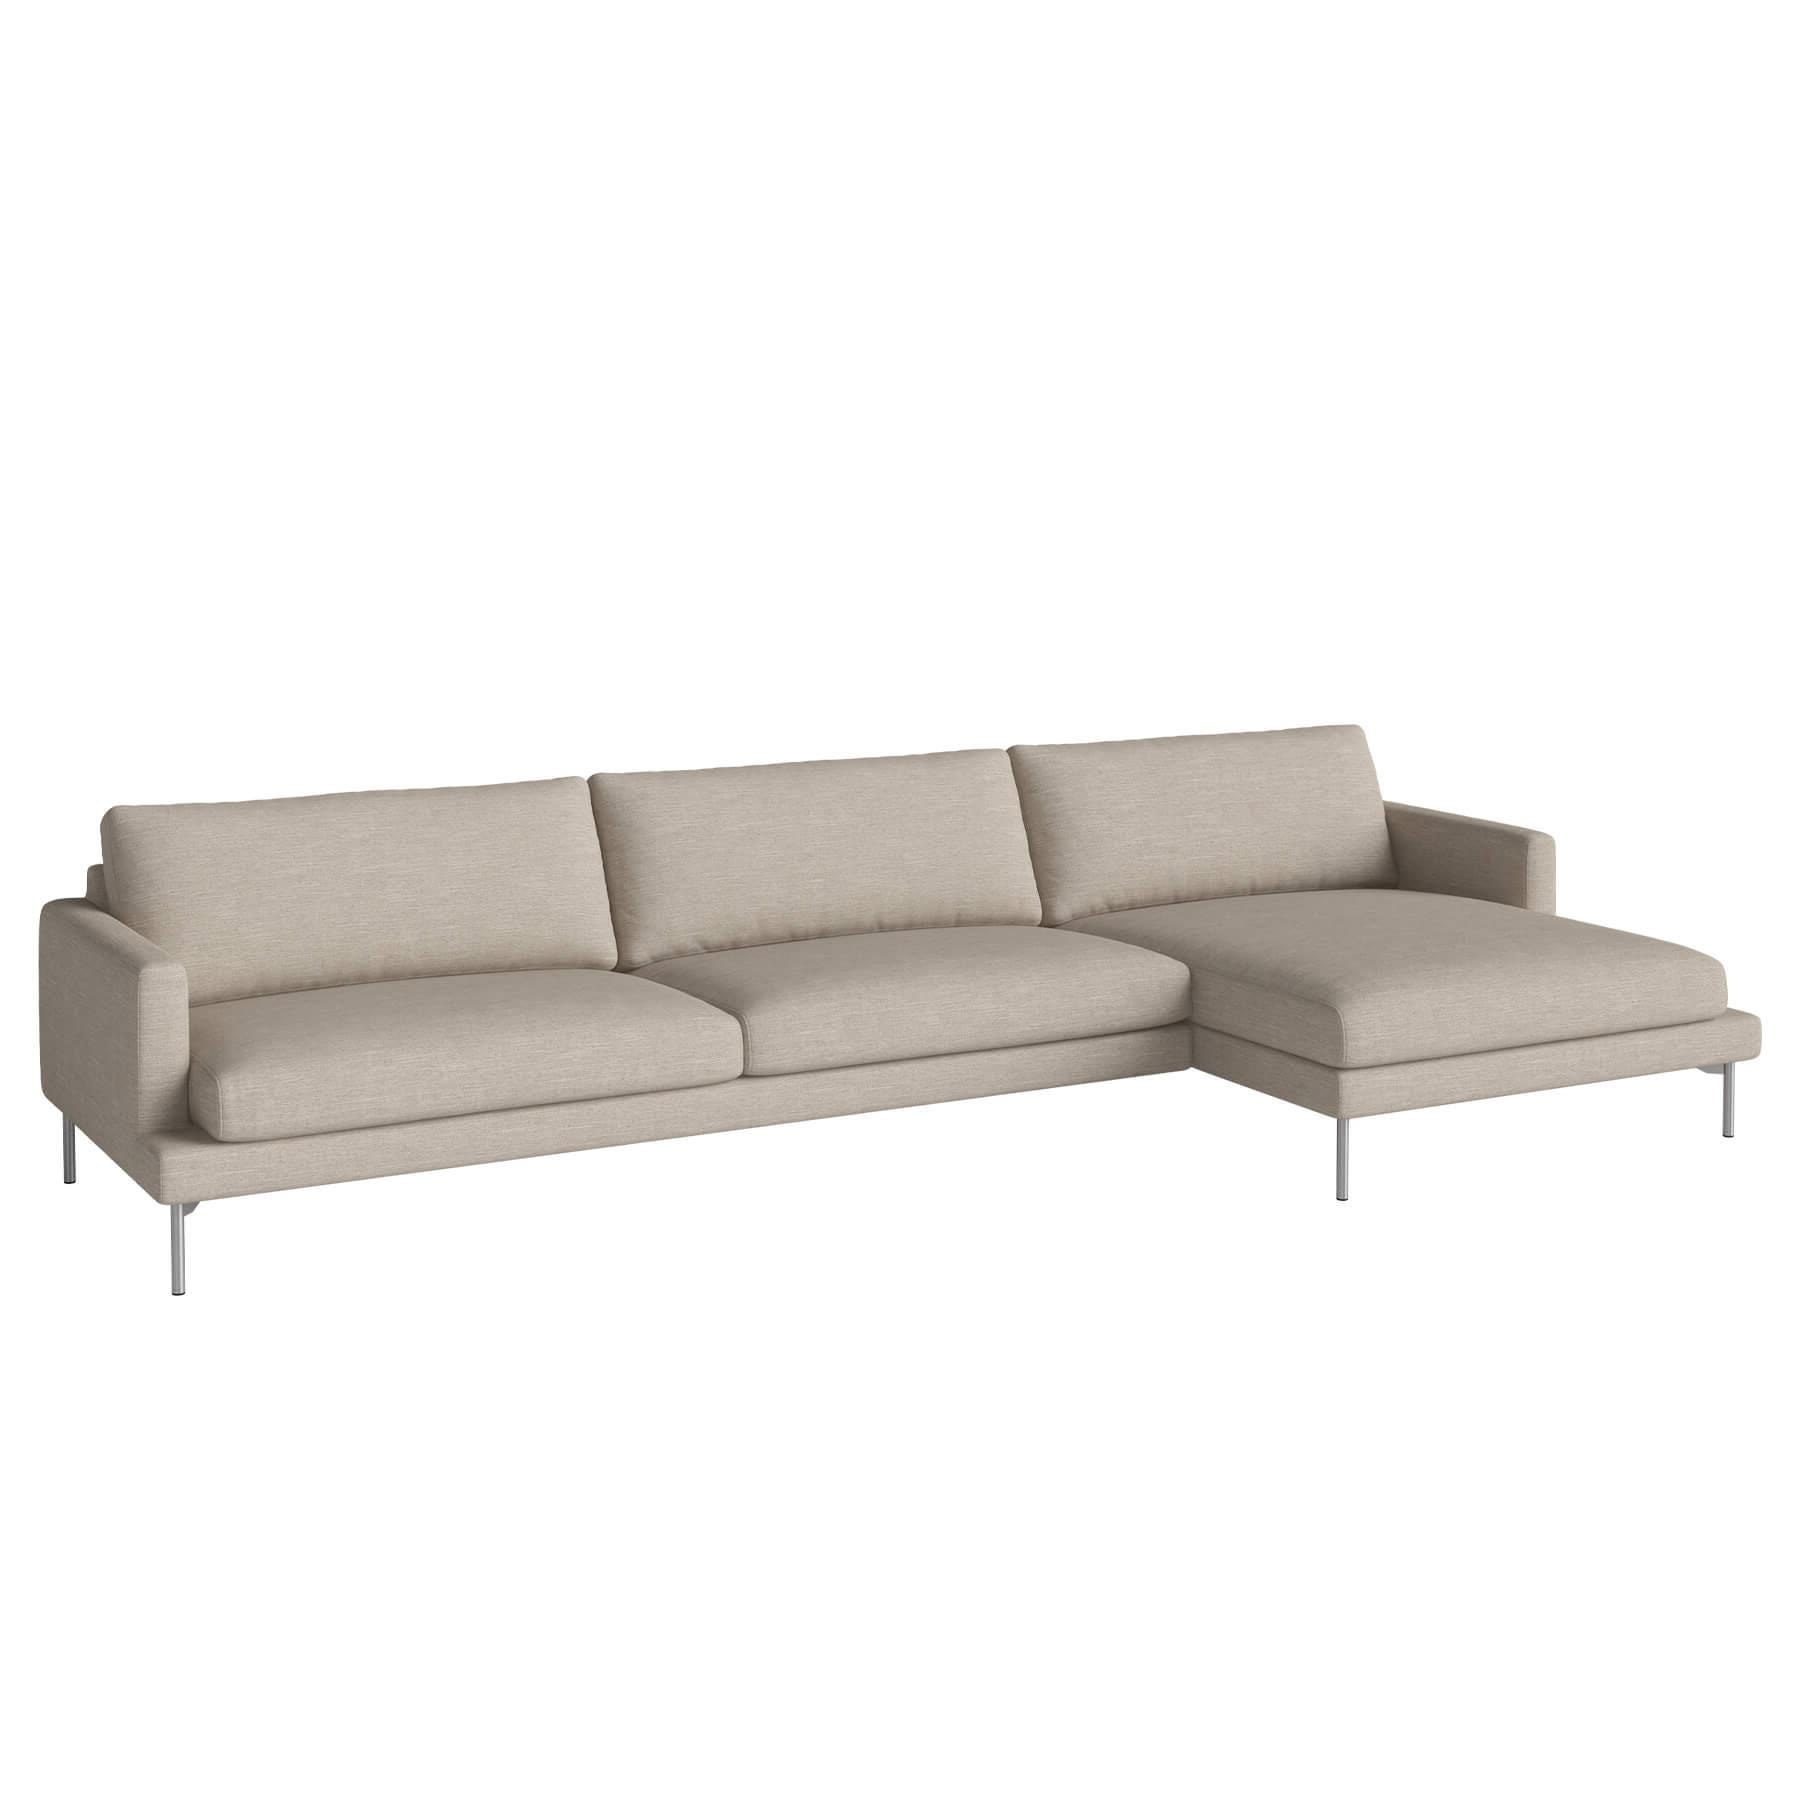 Bolia Veneda Sofa 45 Seater Sofa With Chaise Longue Brushed Steel Baize Sand Right Brown Designer Furniture From Holloways Of Ludlow